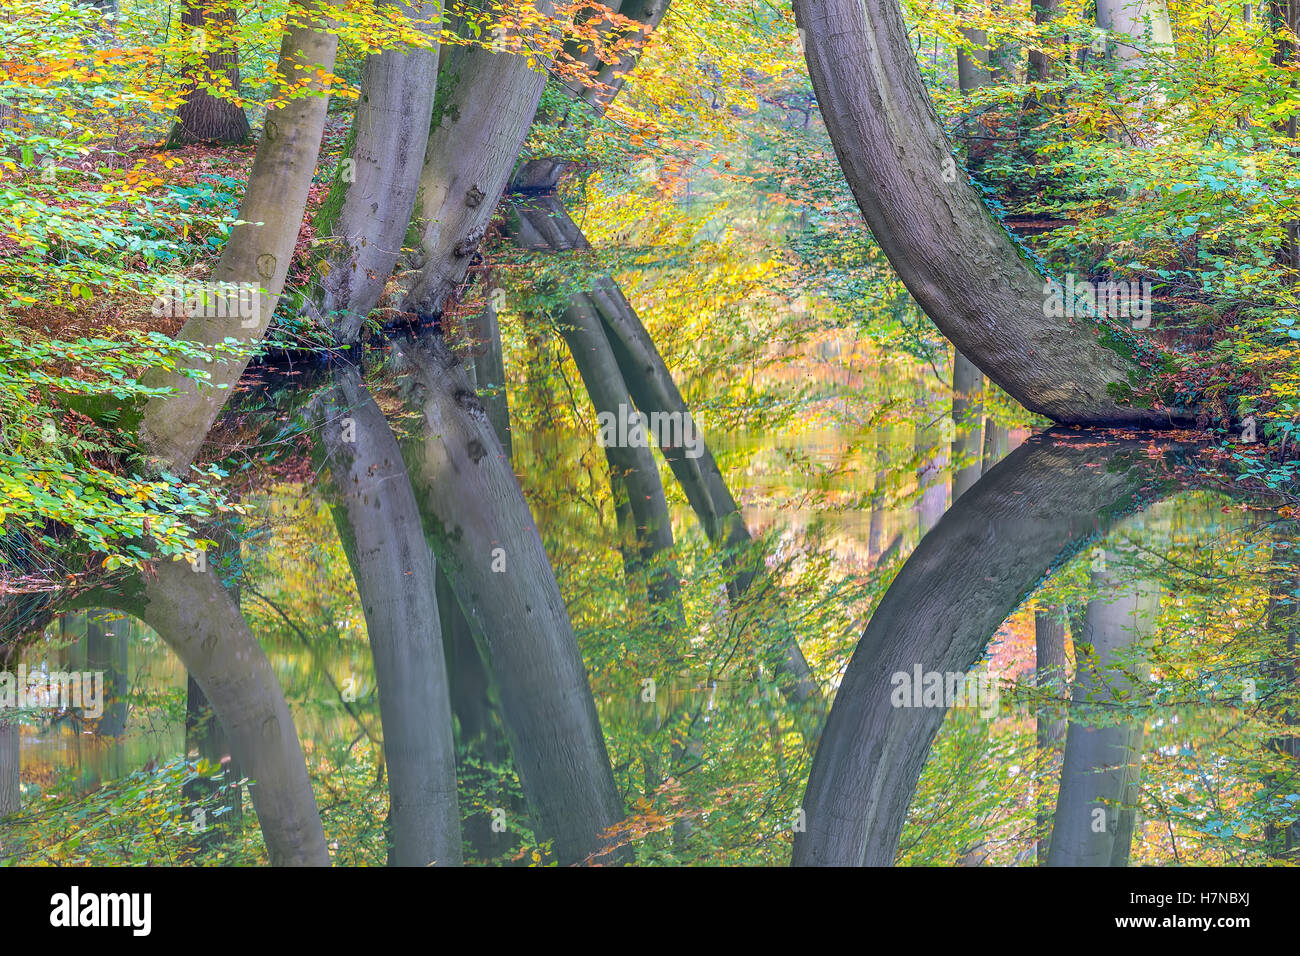 Autumn tree trunks with mirror image in european forest brook Stock Photo